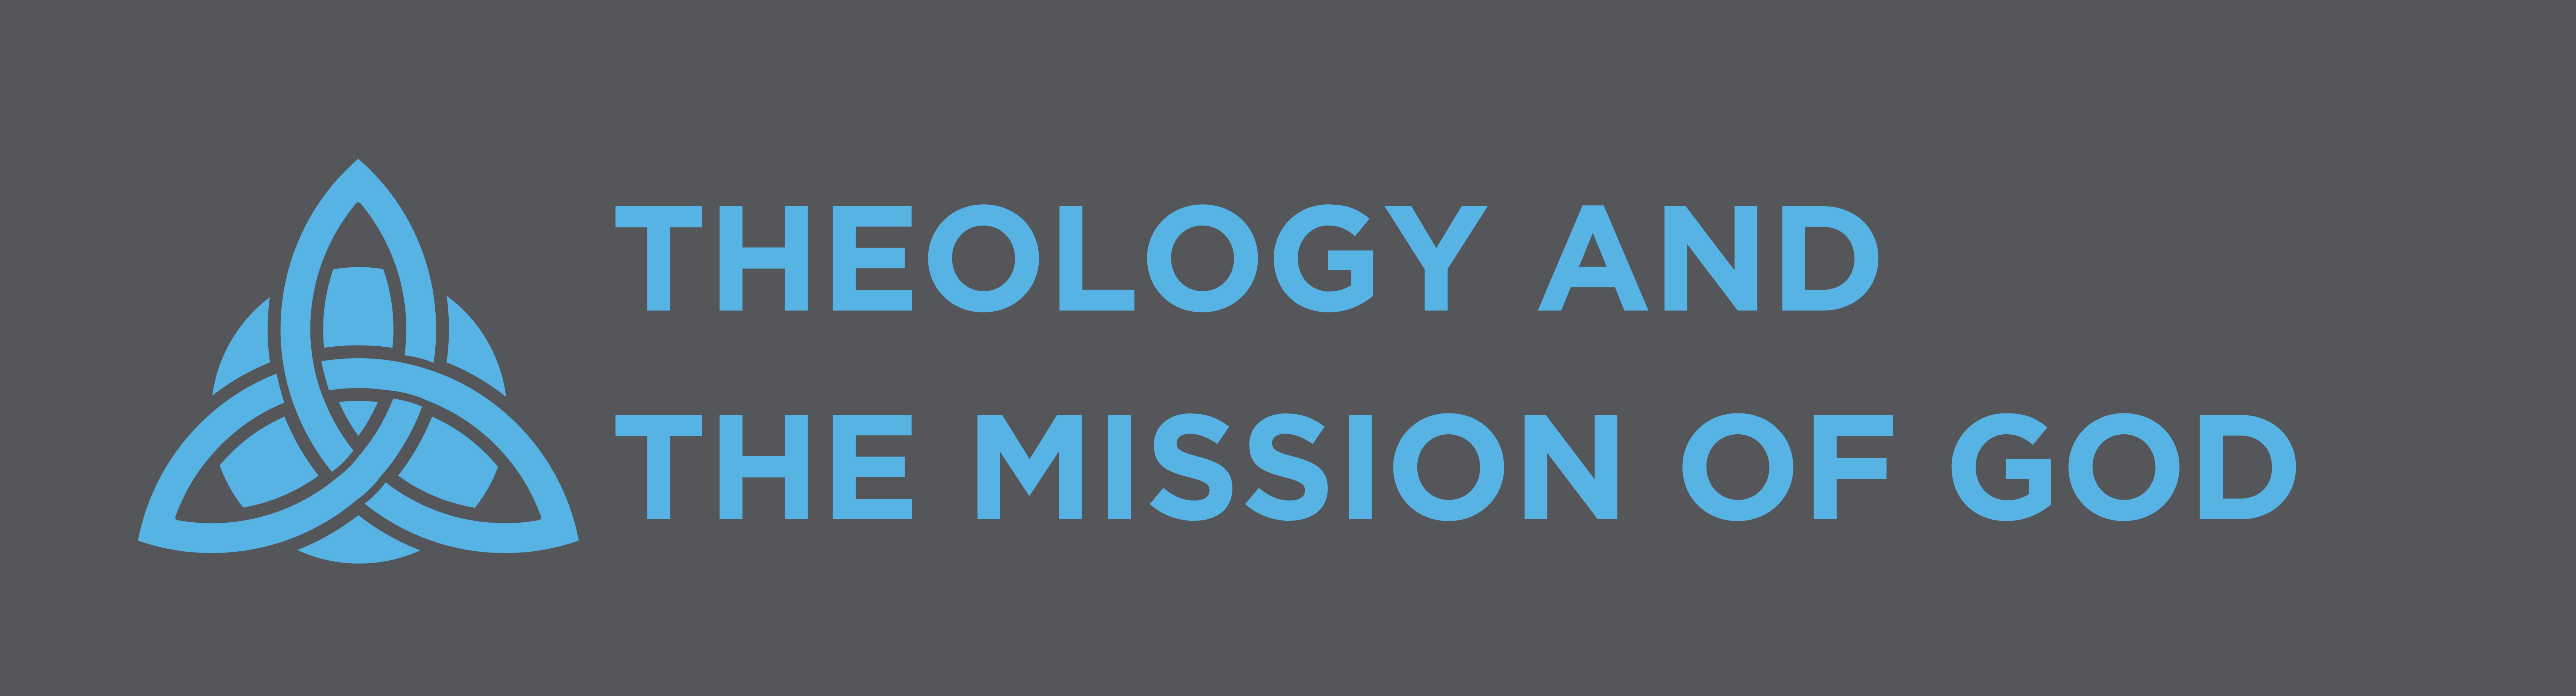 THEOLOGY AND THE MISSION OF GOD-1-1